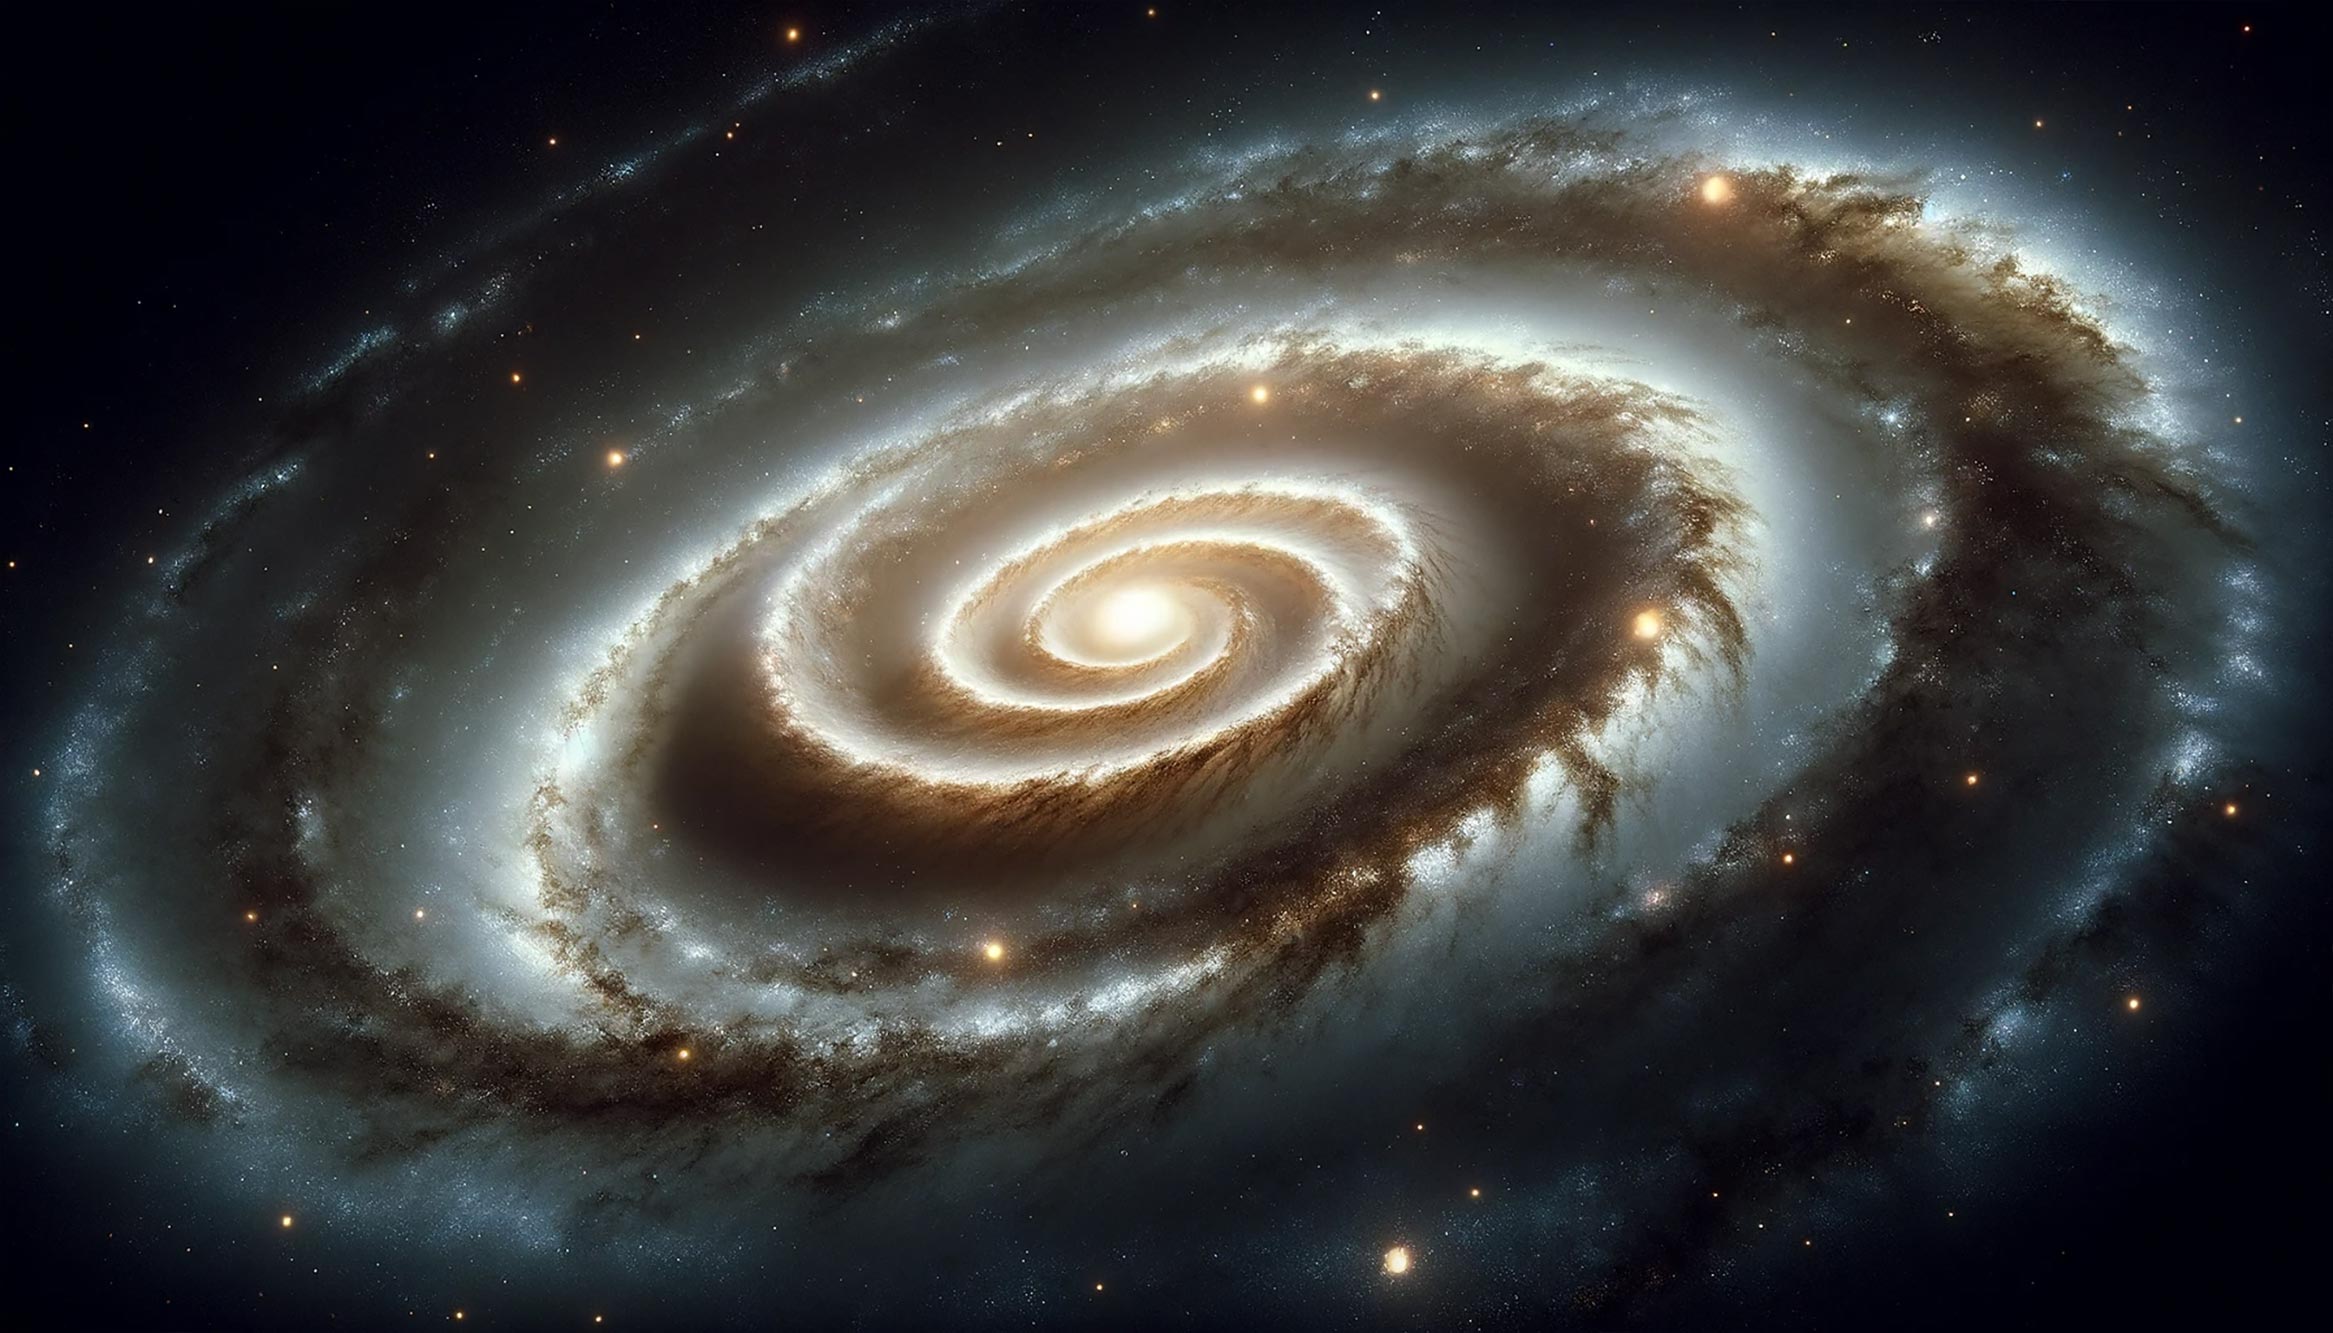 Astronomers have discovered seismic ripples in the oldest spiral galaxy